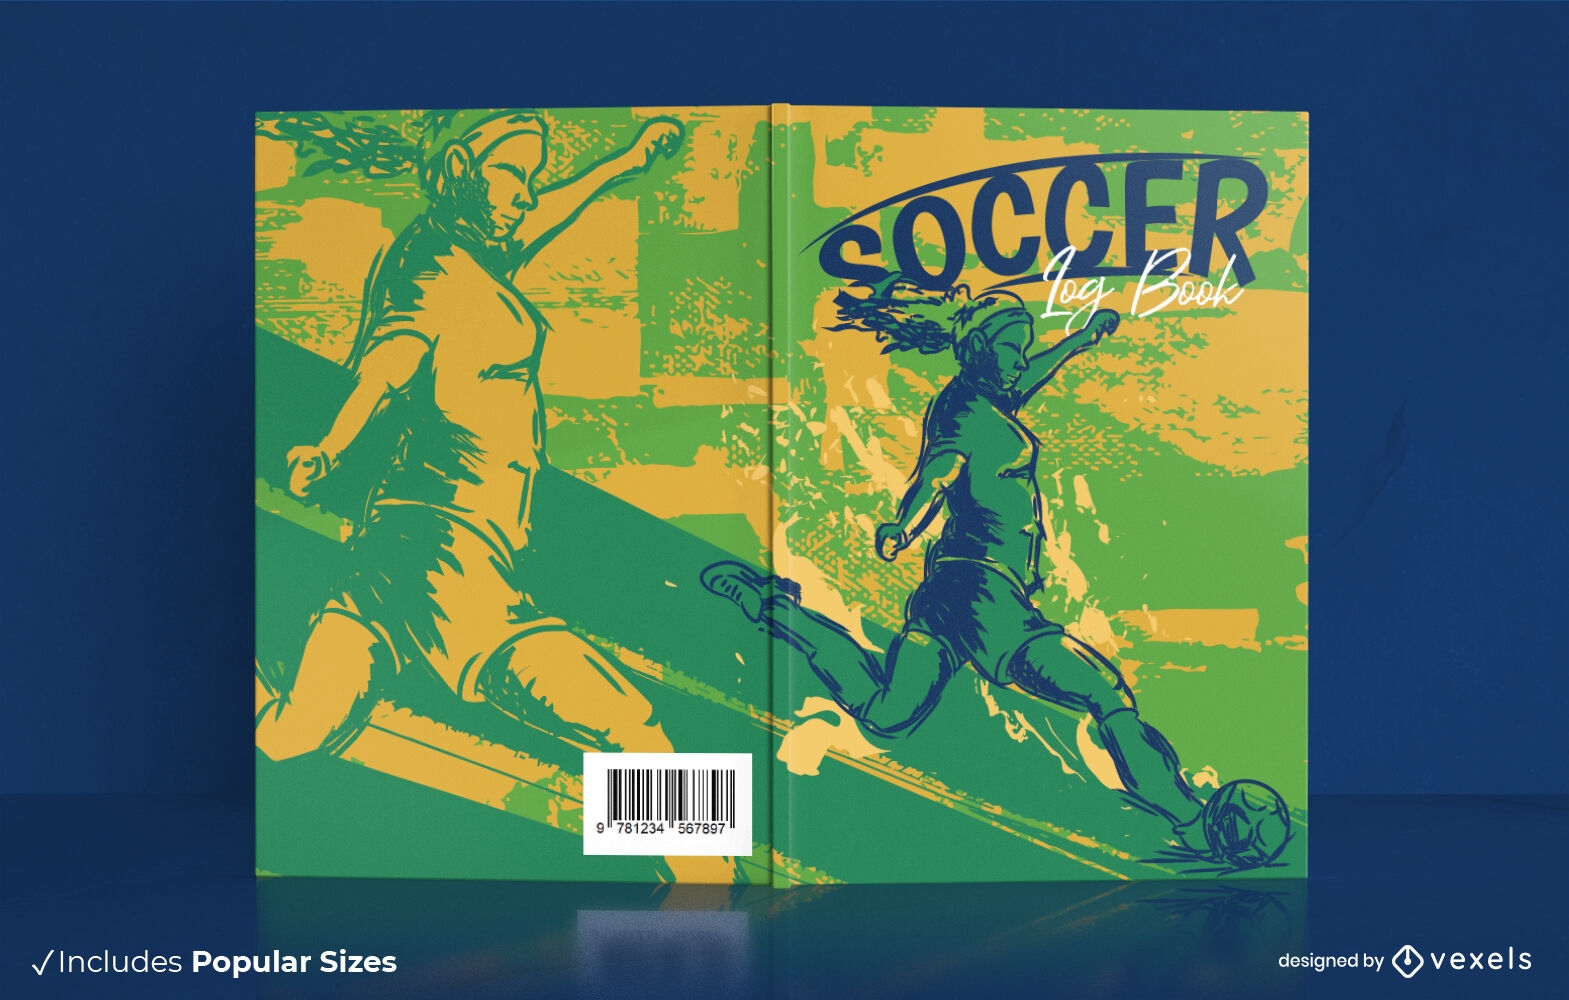 Girl playing soccer book cover design